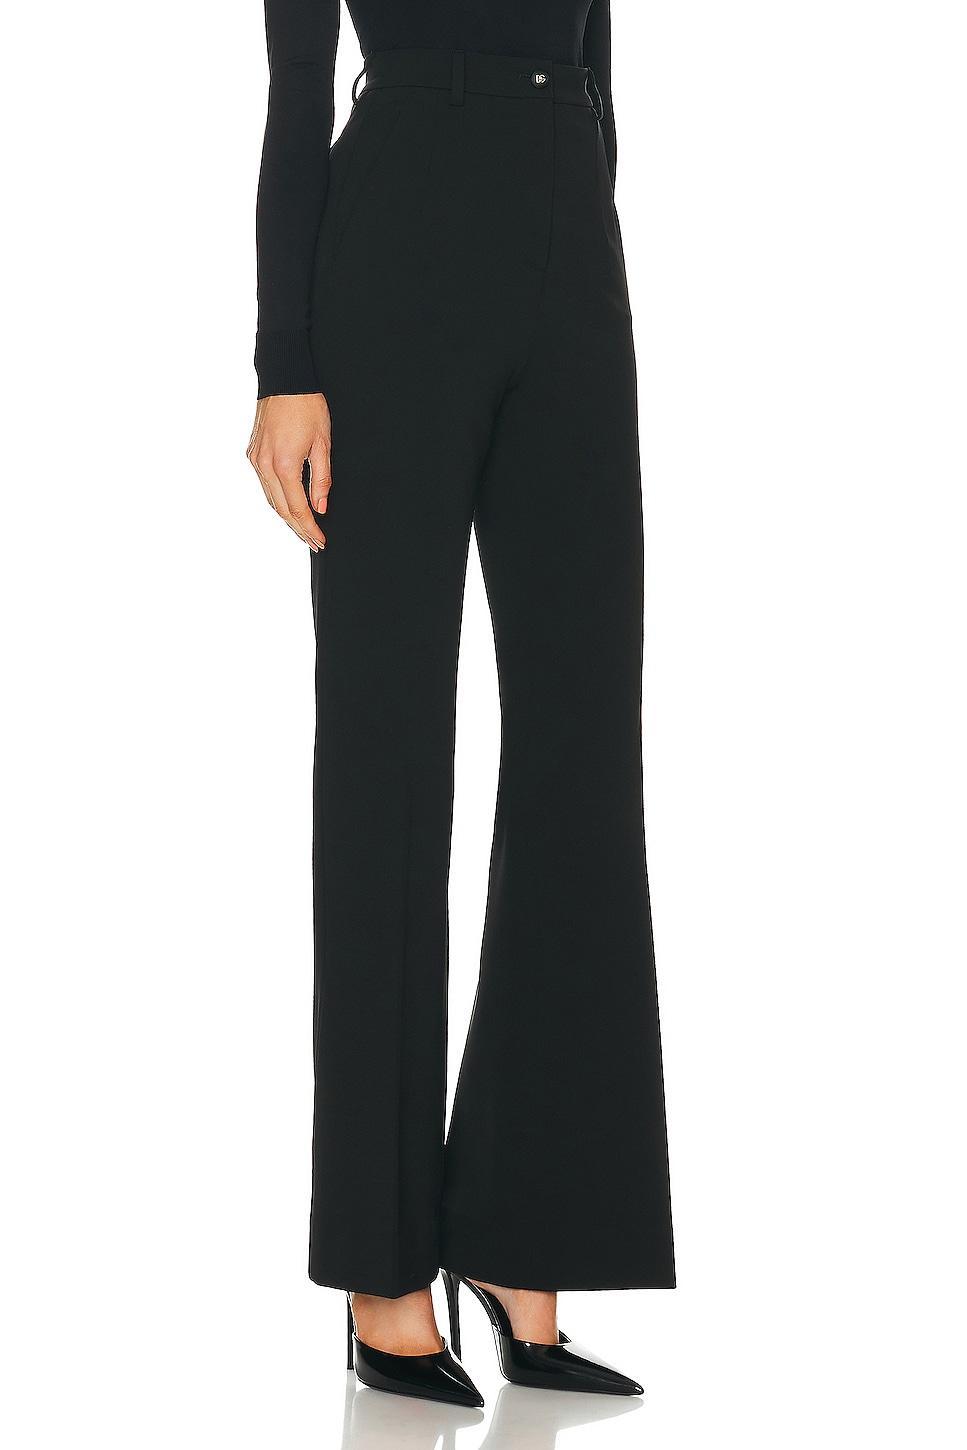 Dolce & Gabbana Flared Pants Black. (also in 38, 40, 42). Product Image